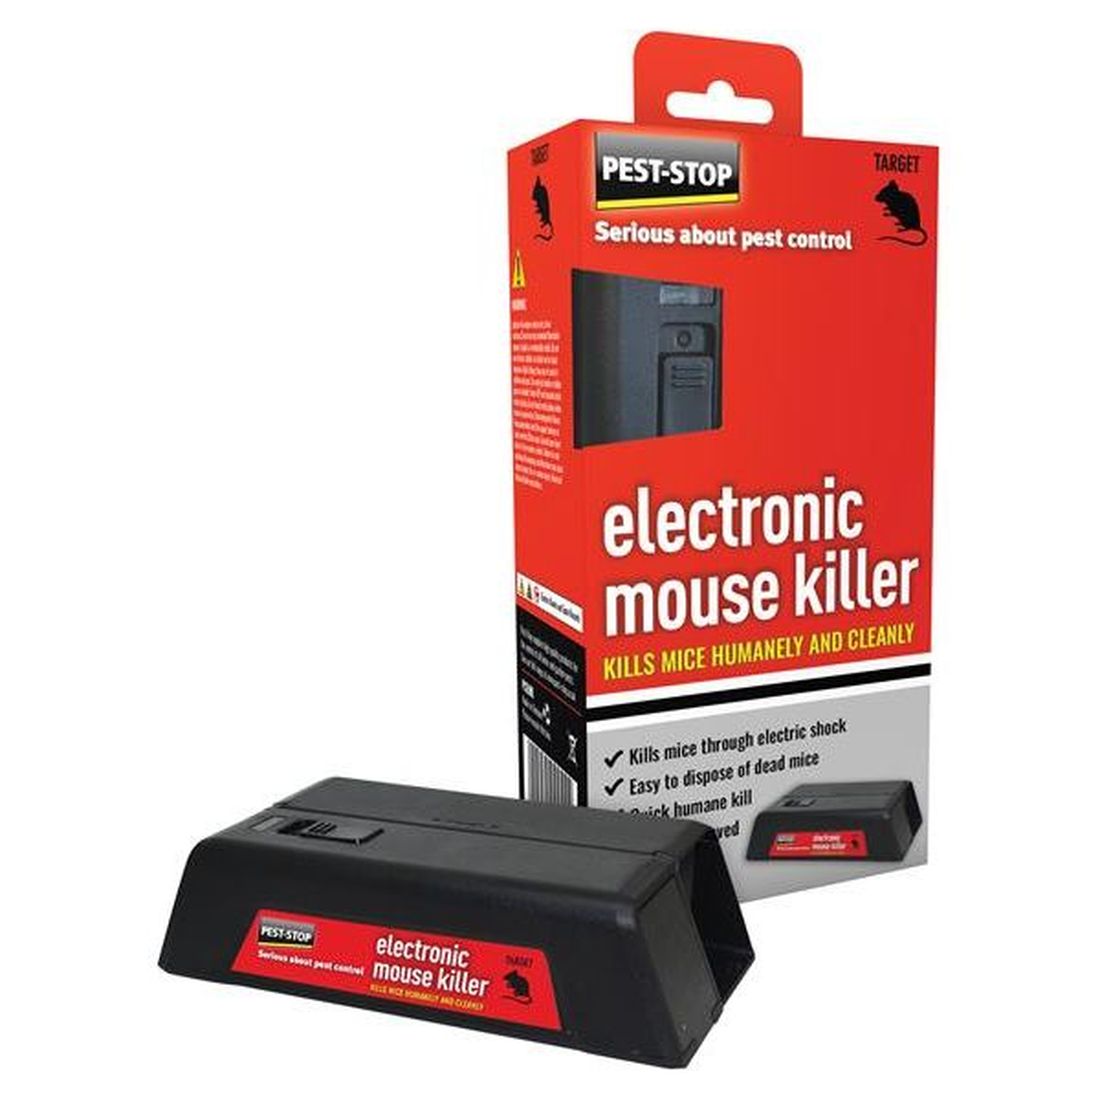 Pest-Stop Electronic Mouse Killer           